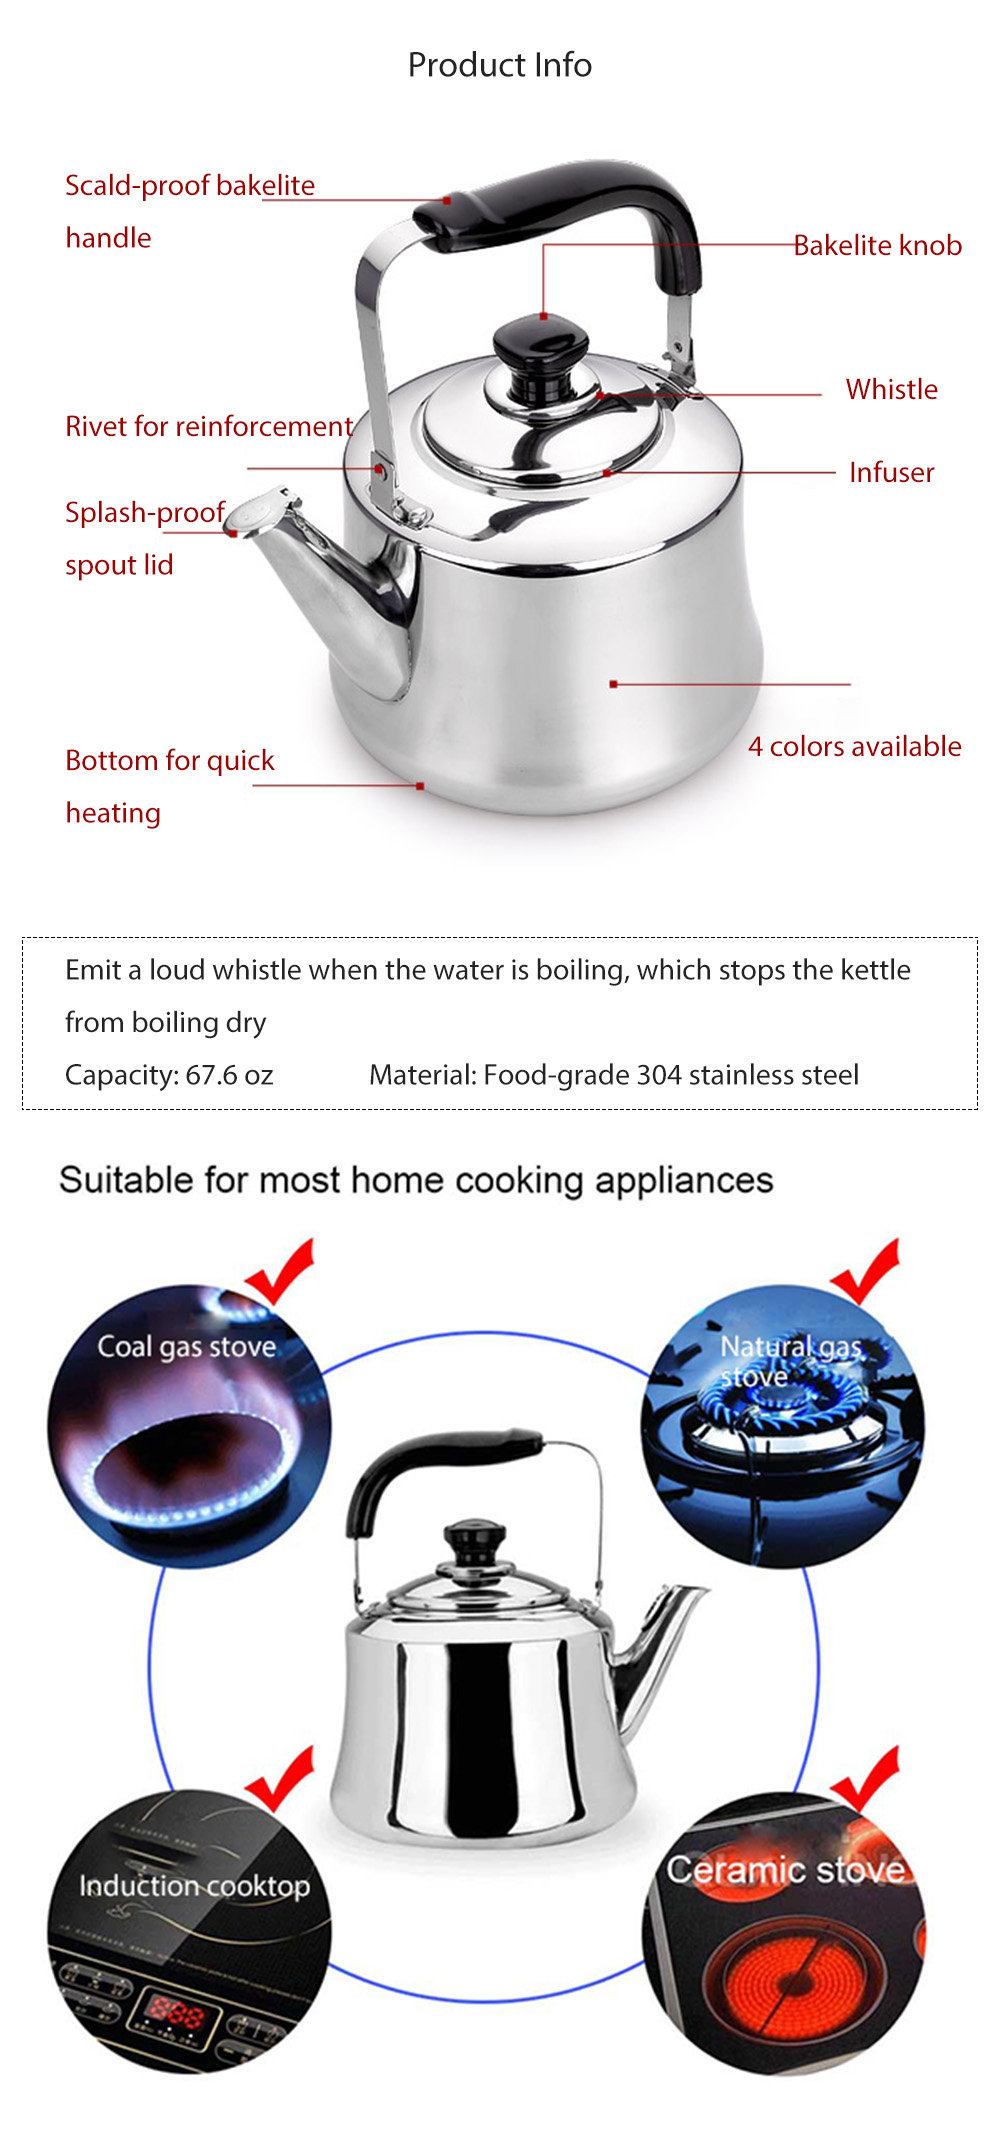 Induction Cooker Whistling Kettle - ApolloBox